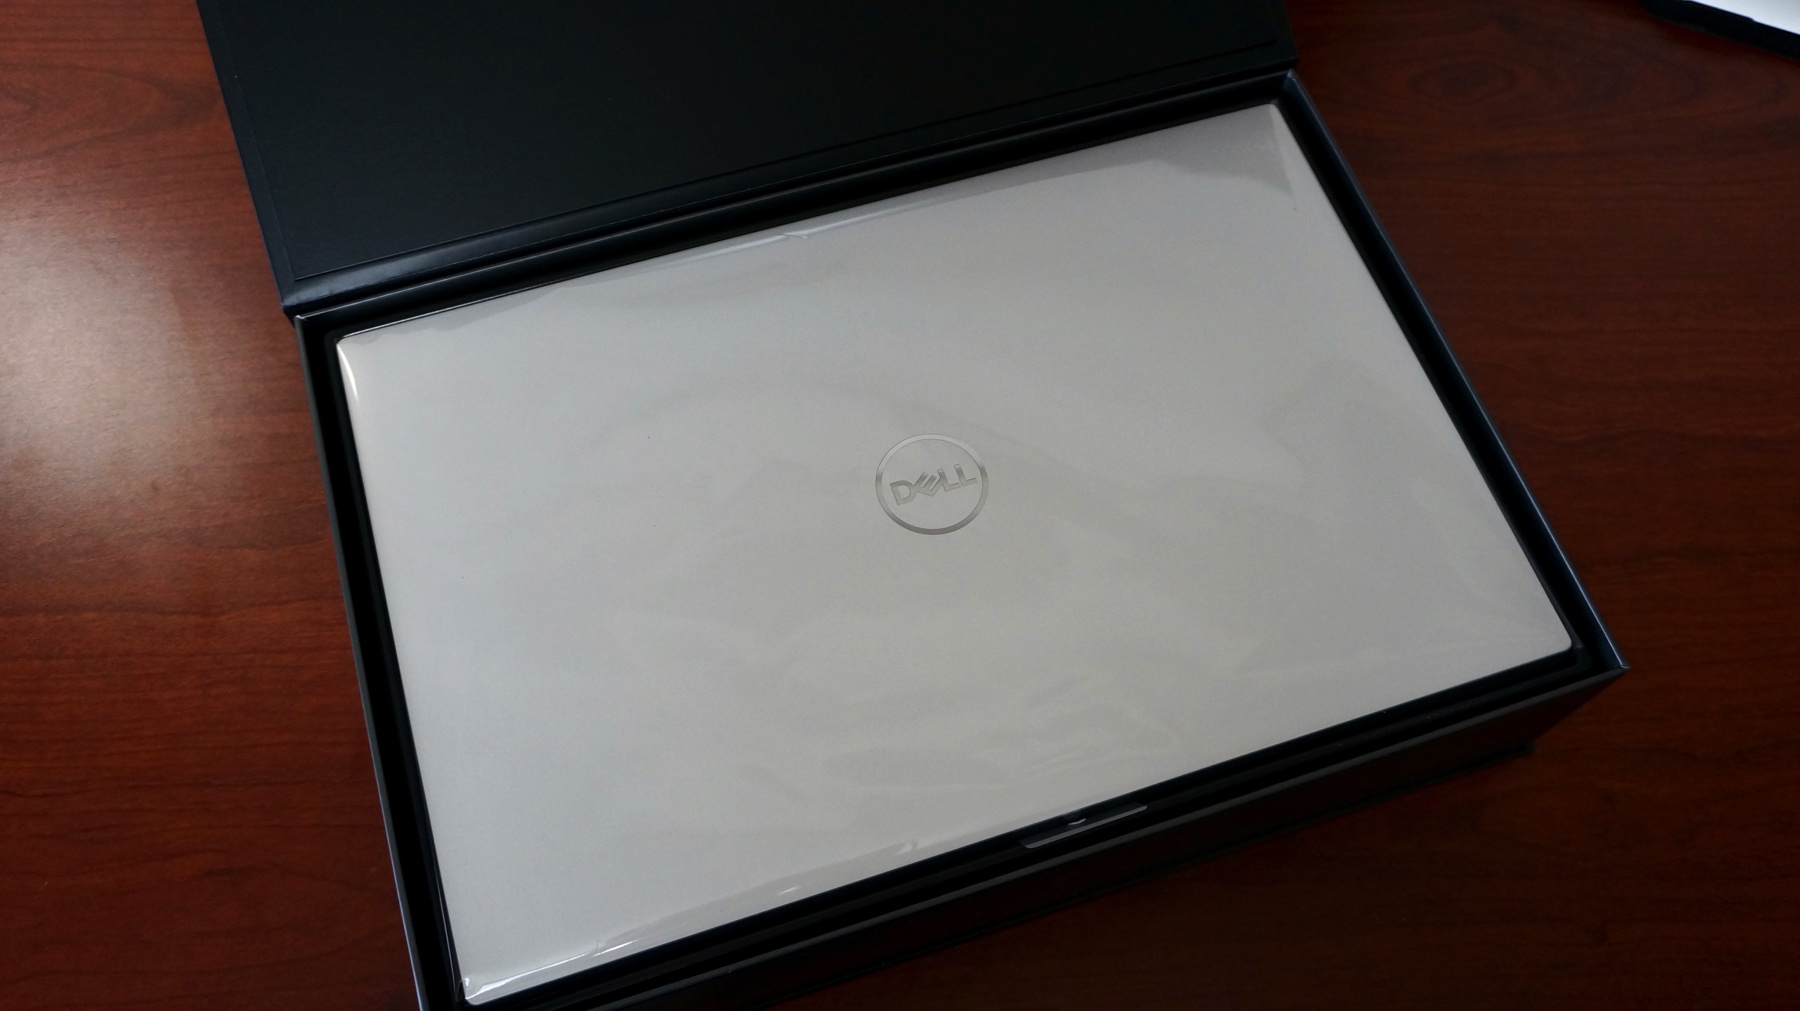 DELL XPS 17